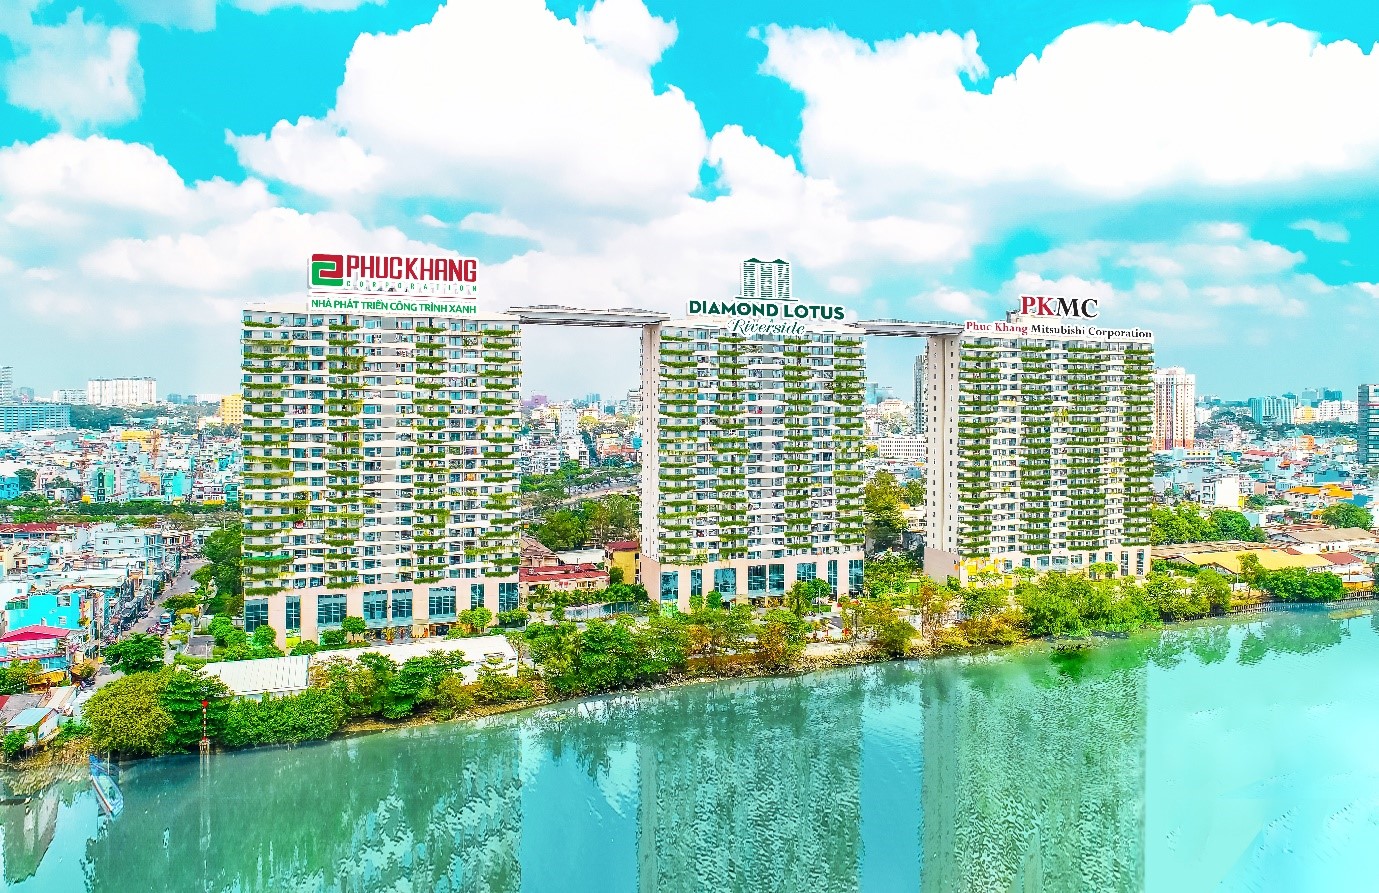 Diamond Lotus Riverside – the green building project developed by CEO Luu Thi Thanh Mau and Phuc Khang Corporation